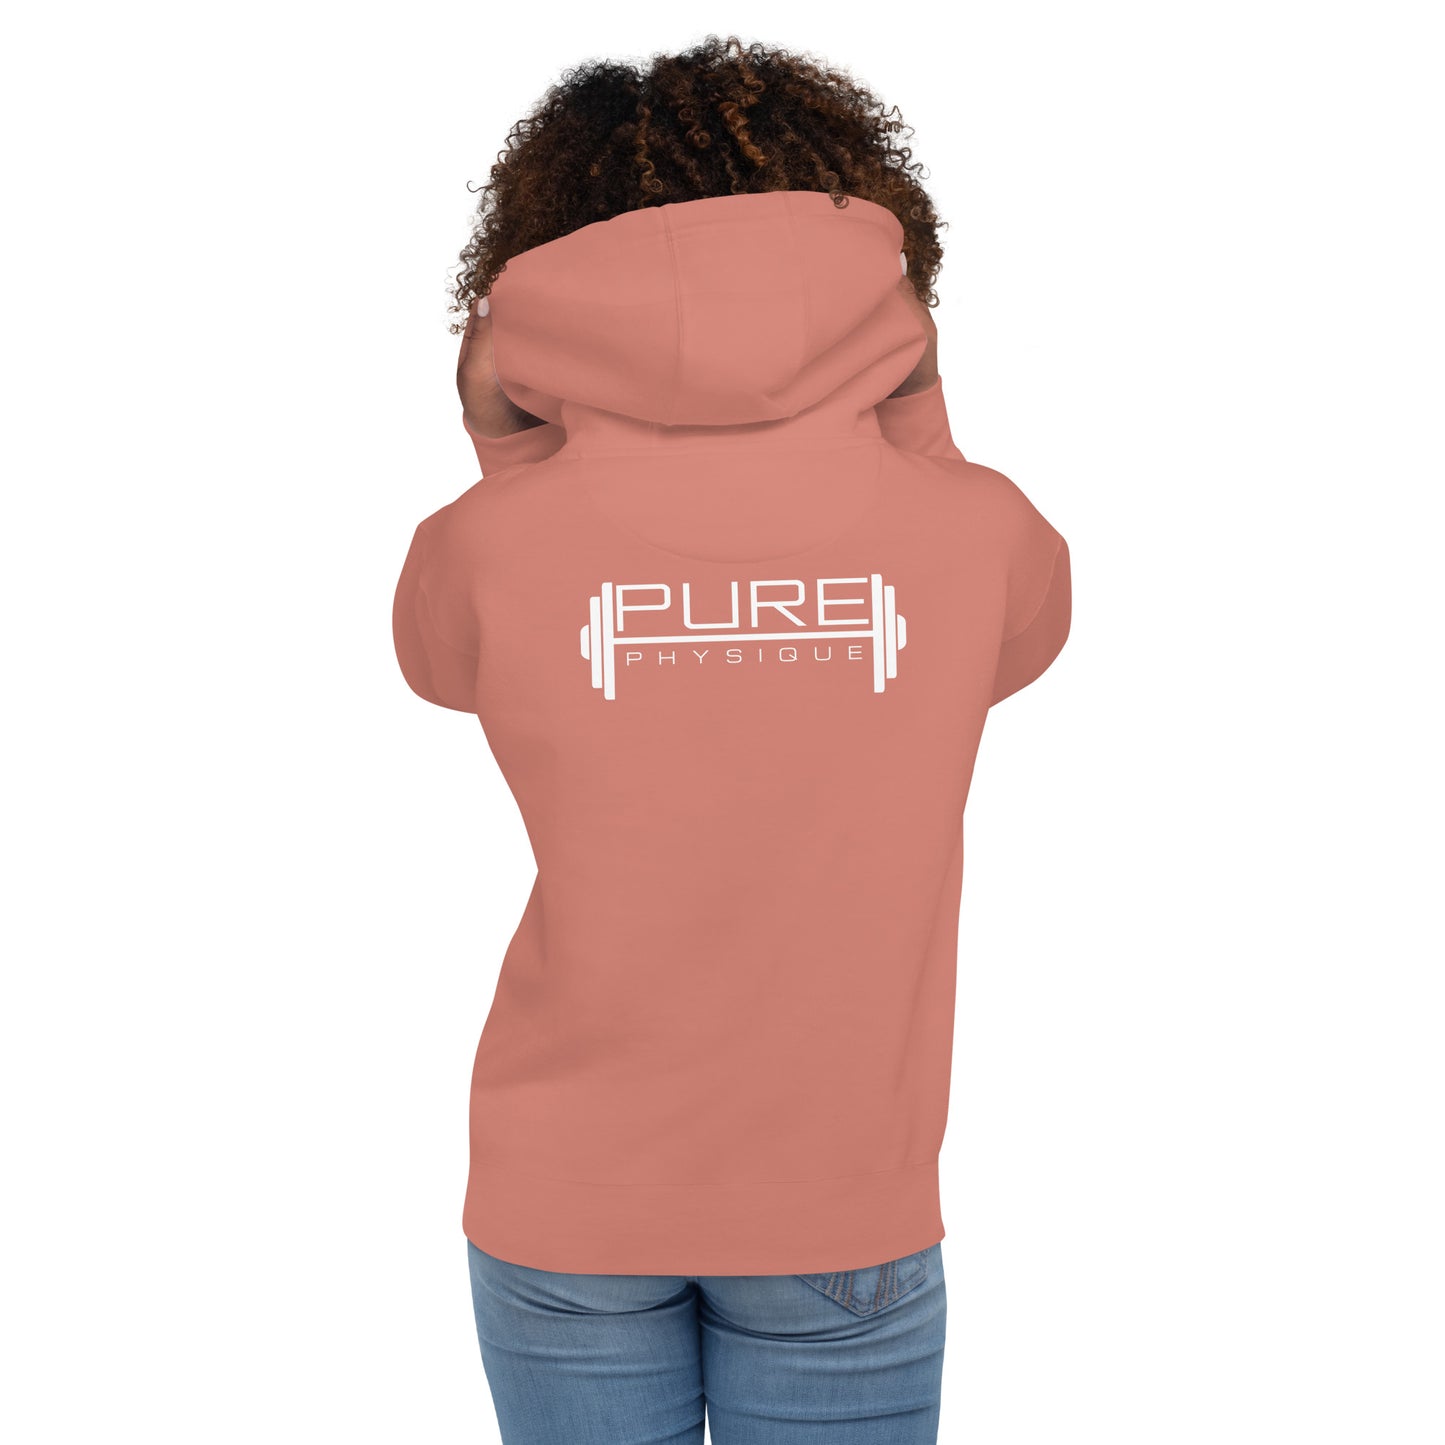 "PURE PHYSIQUE" Unisex Hoodie